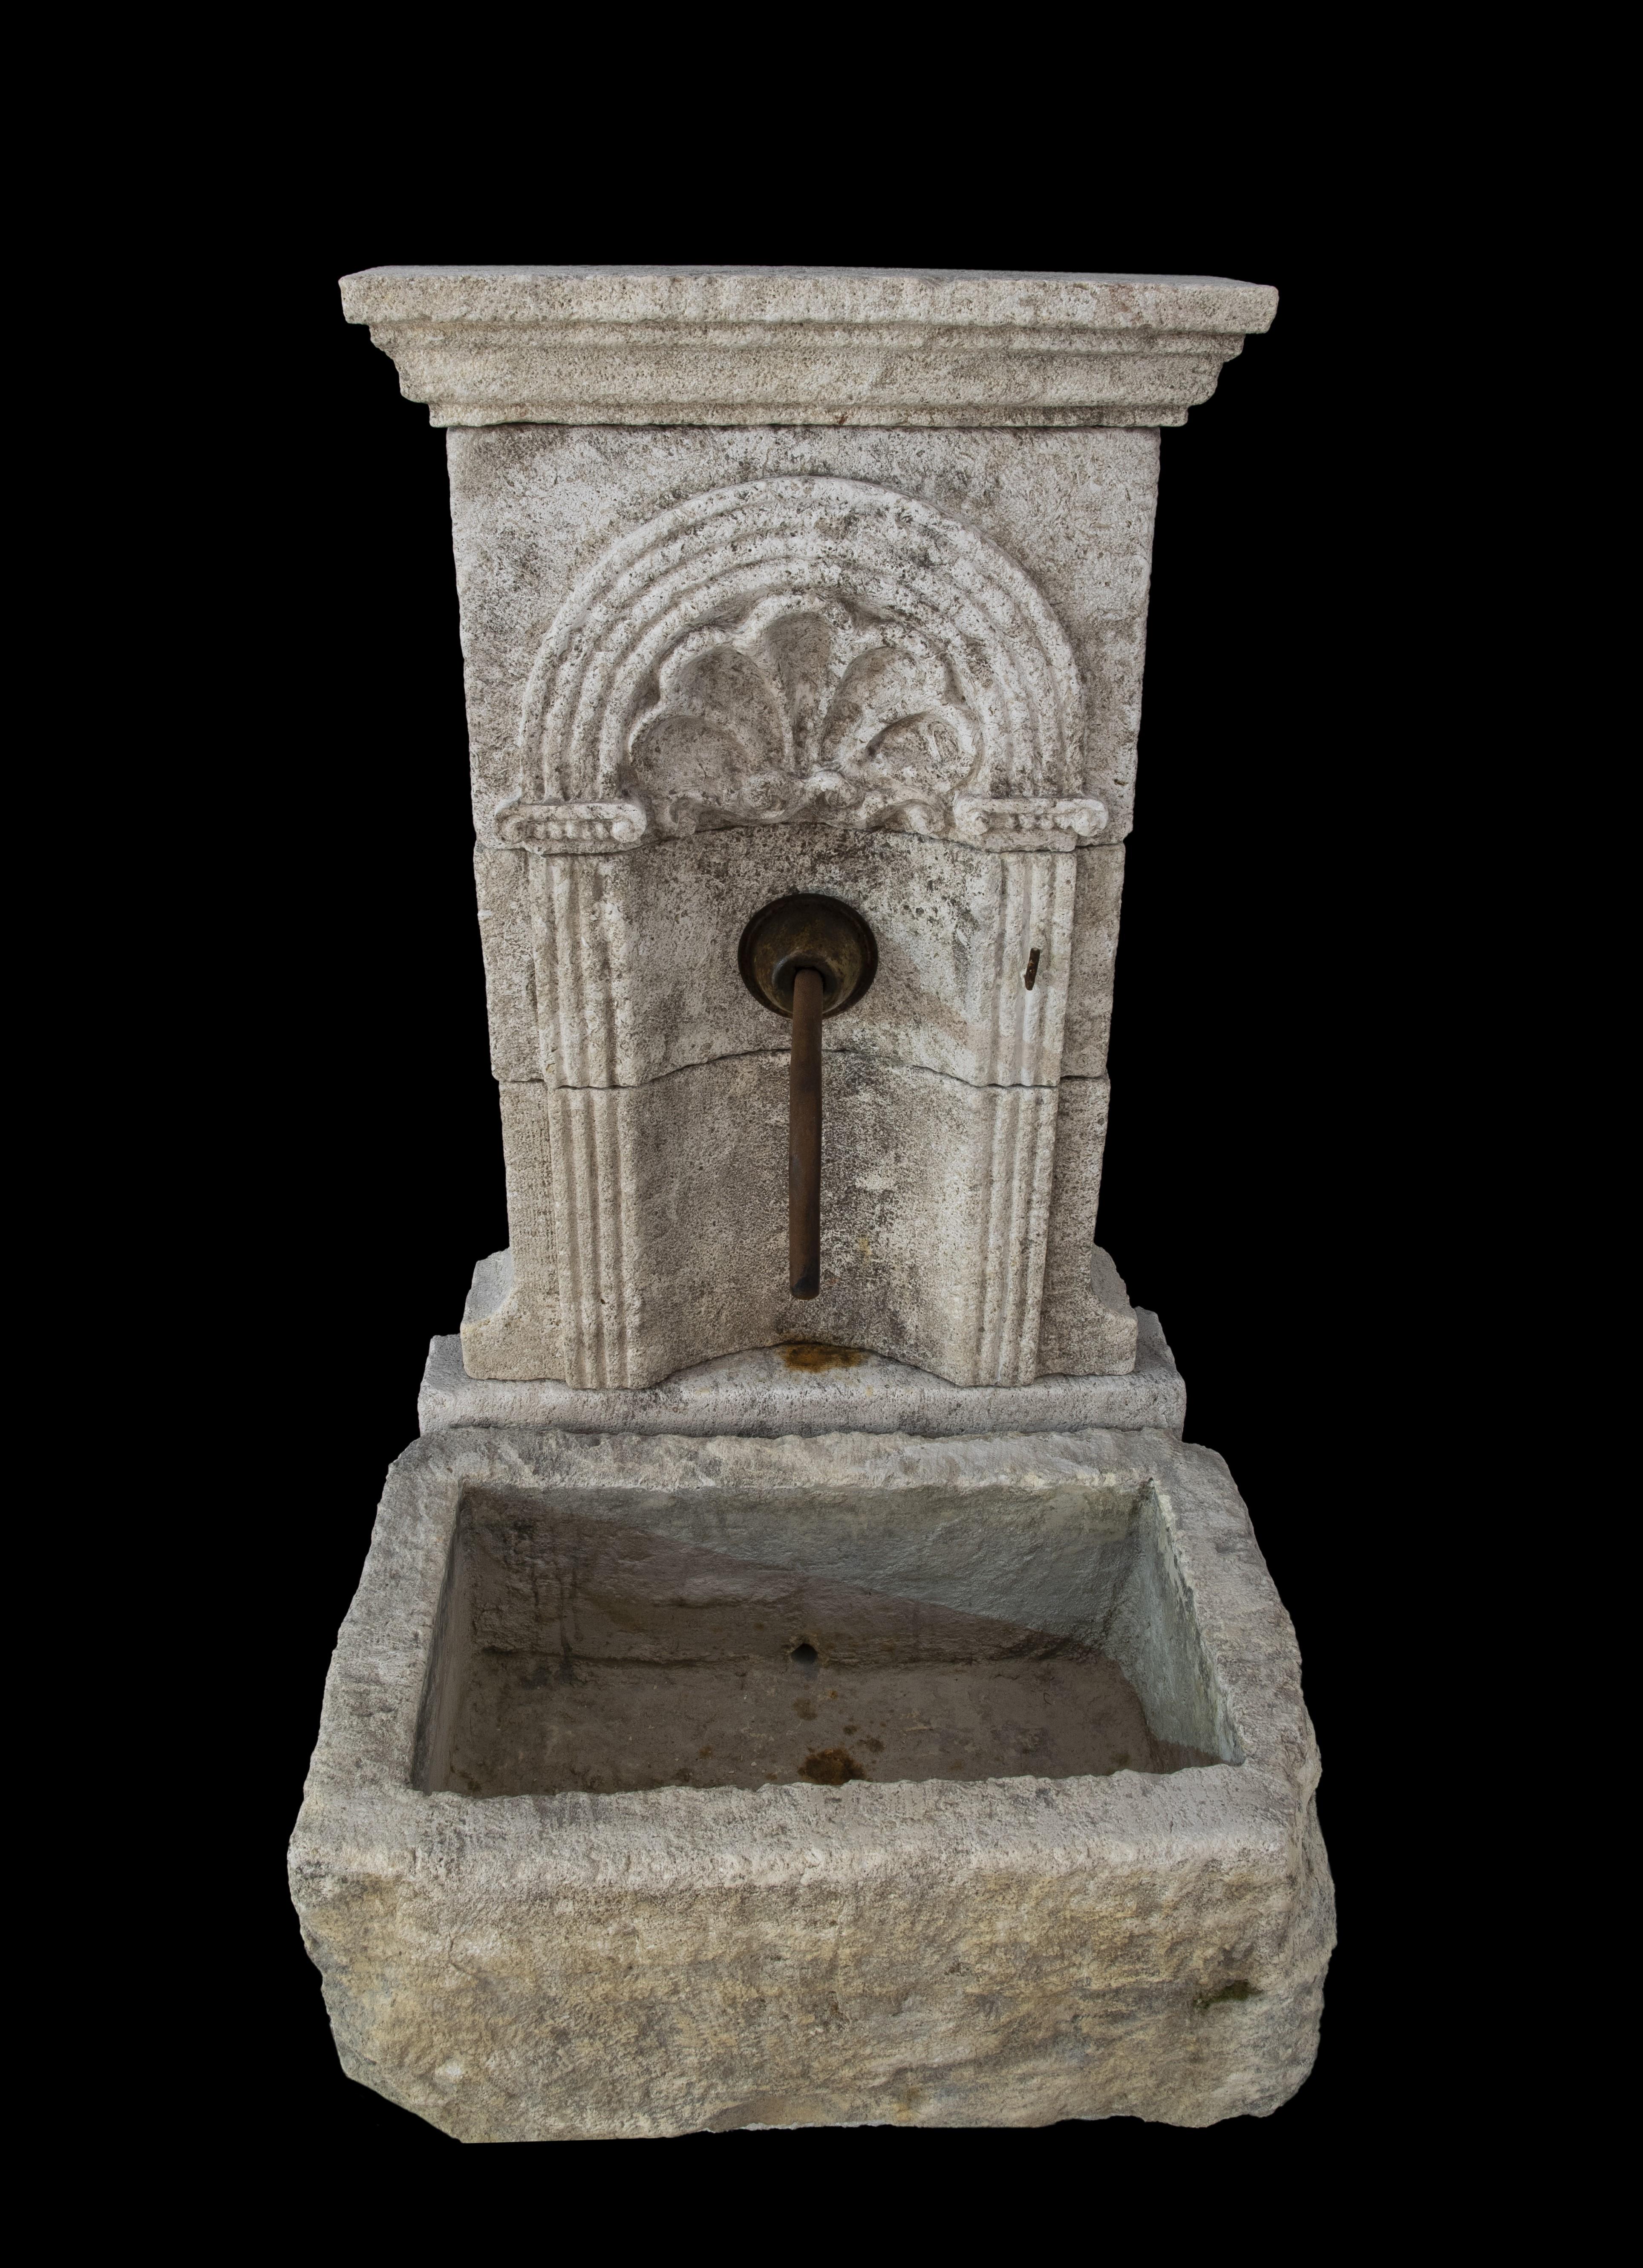 Rustic Beautiful antique reclaimed old limestone wall fountain - Tuscan - Mediterranean For Sale